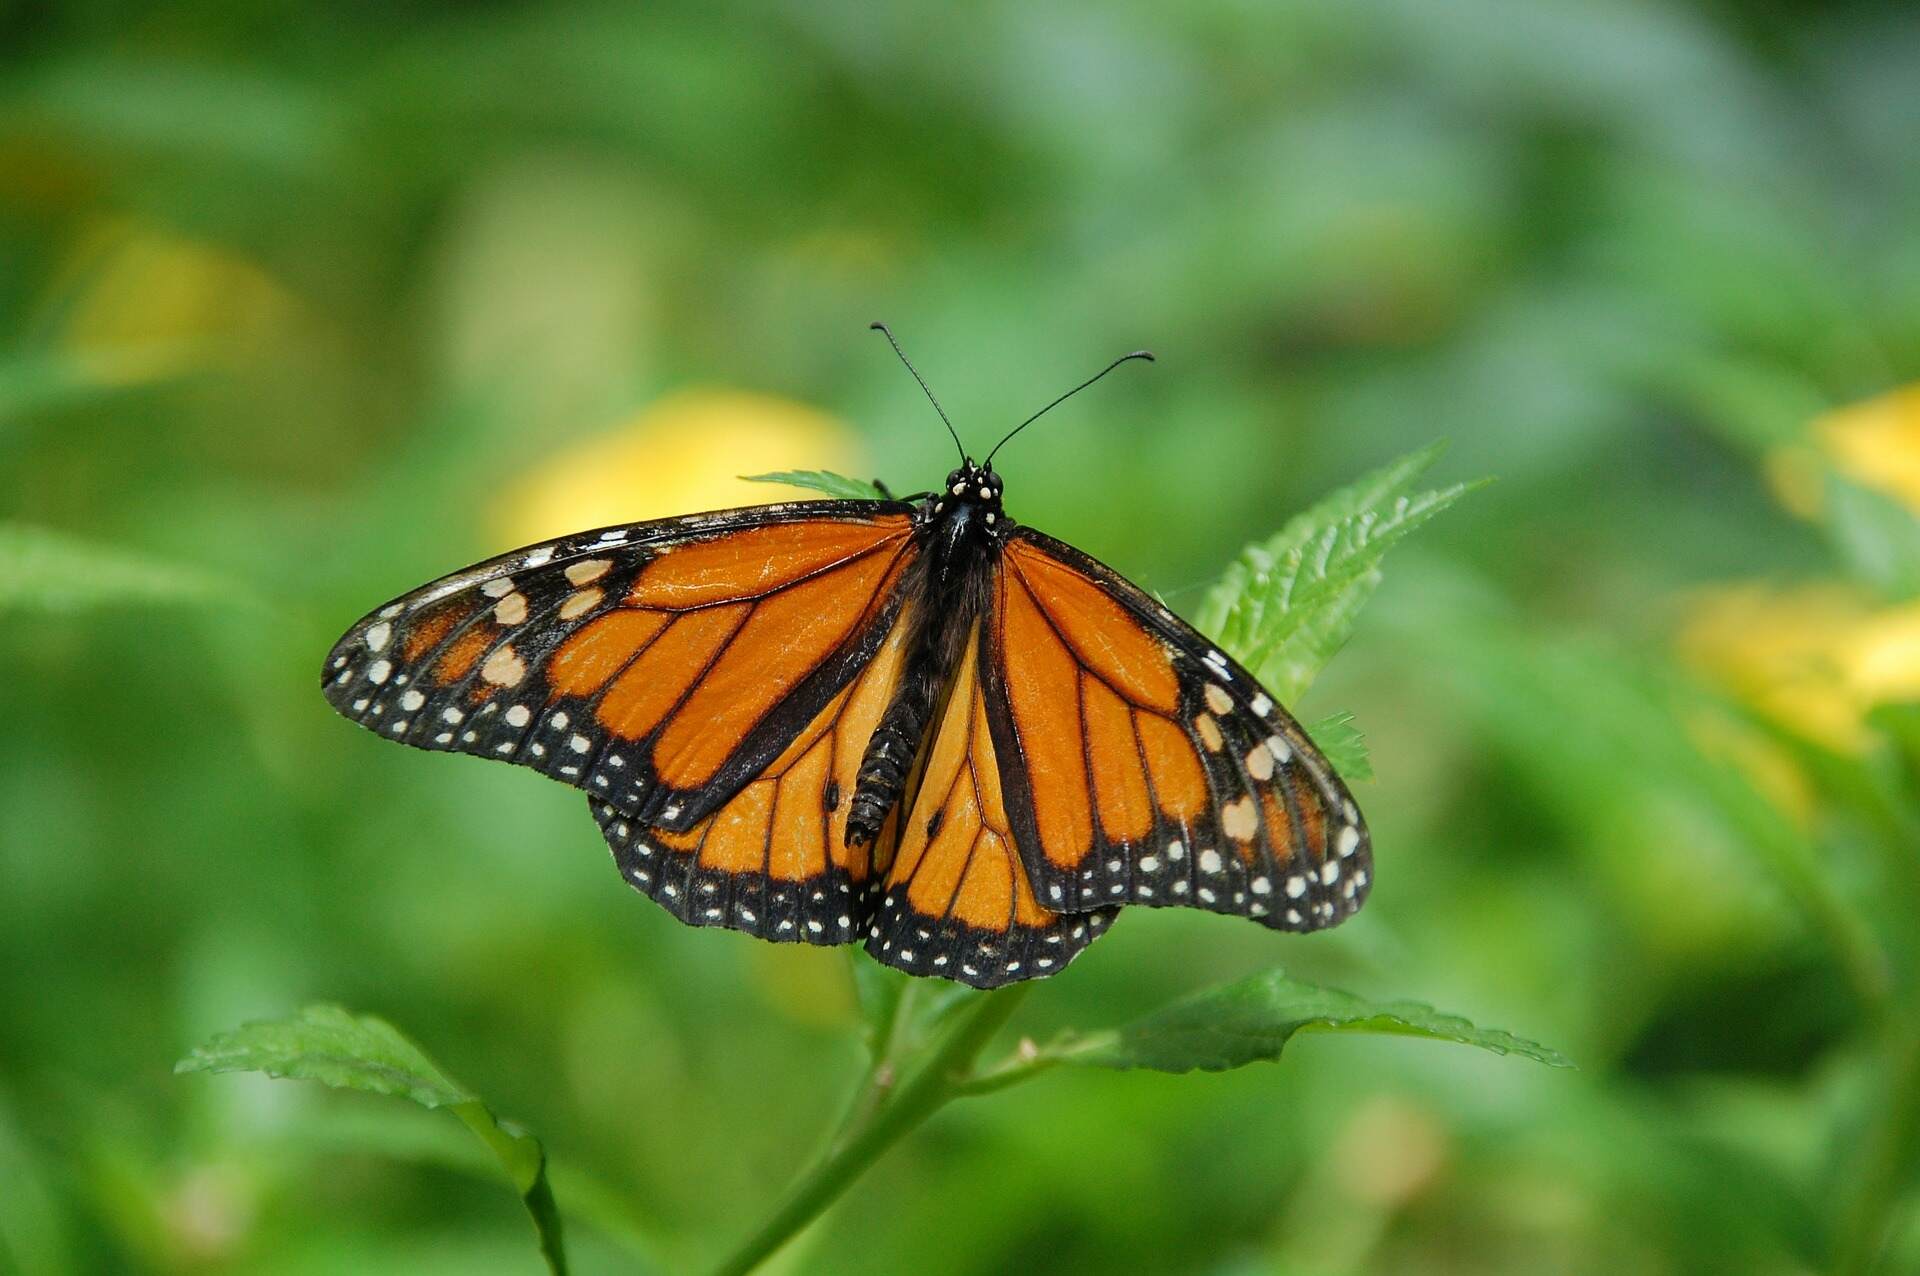 U of G Researchers Identify Monarch Butterfly Birthplaces to Help Conserve Species